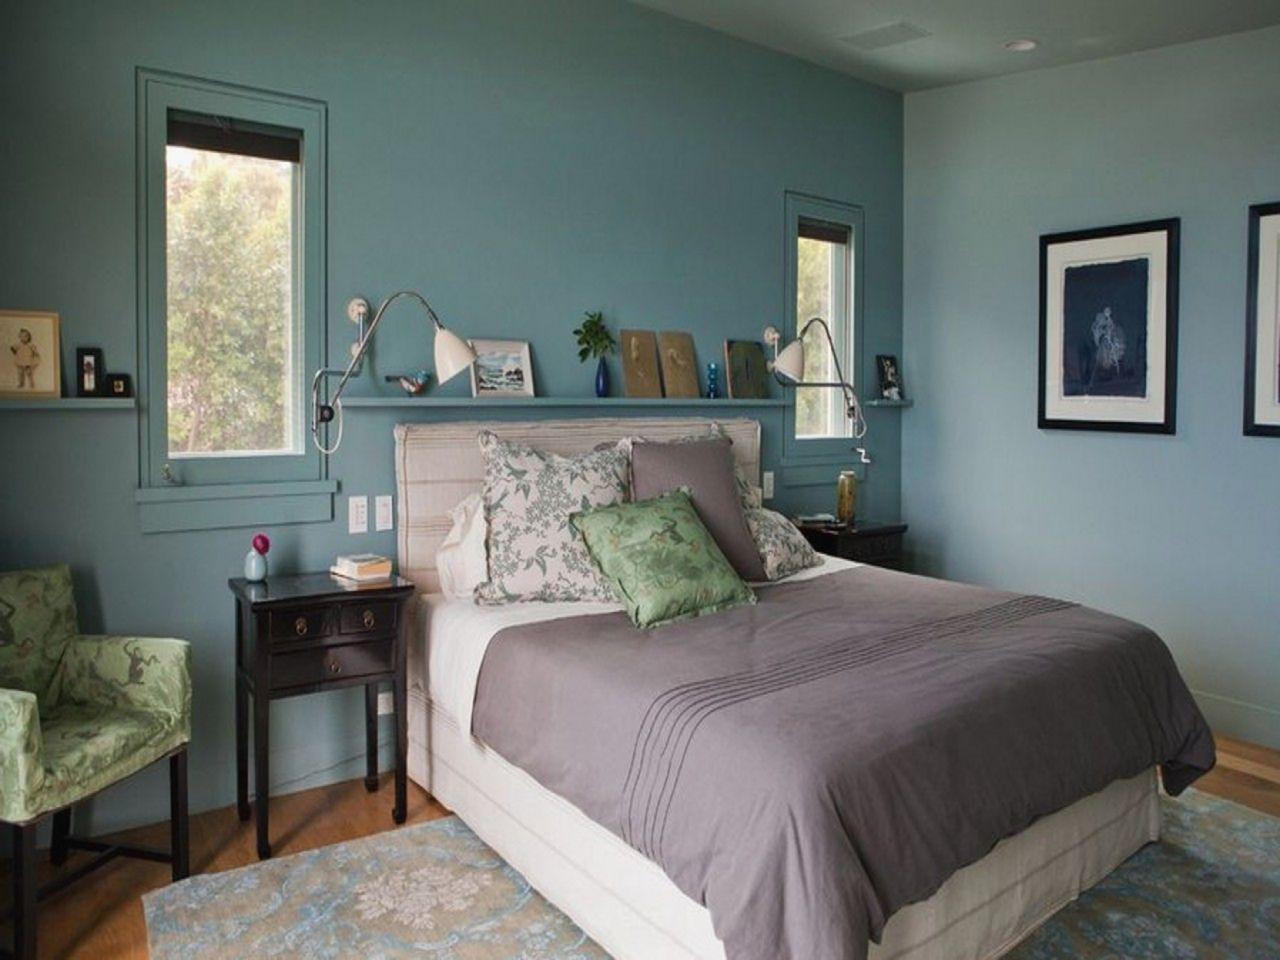 Blue Paint Colors For Bedroom
 Brittany blue benjamin moore bedroom paint colors – DECOR IT S